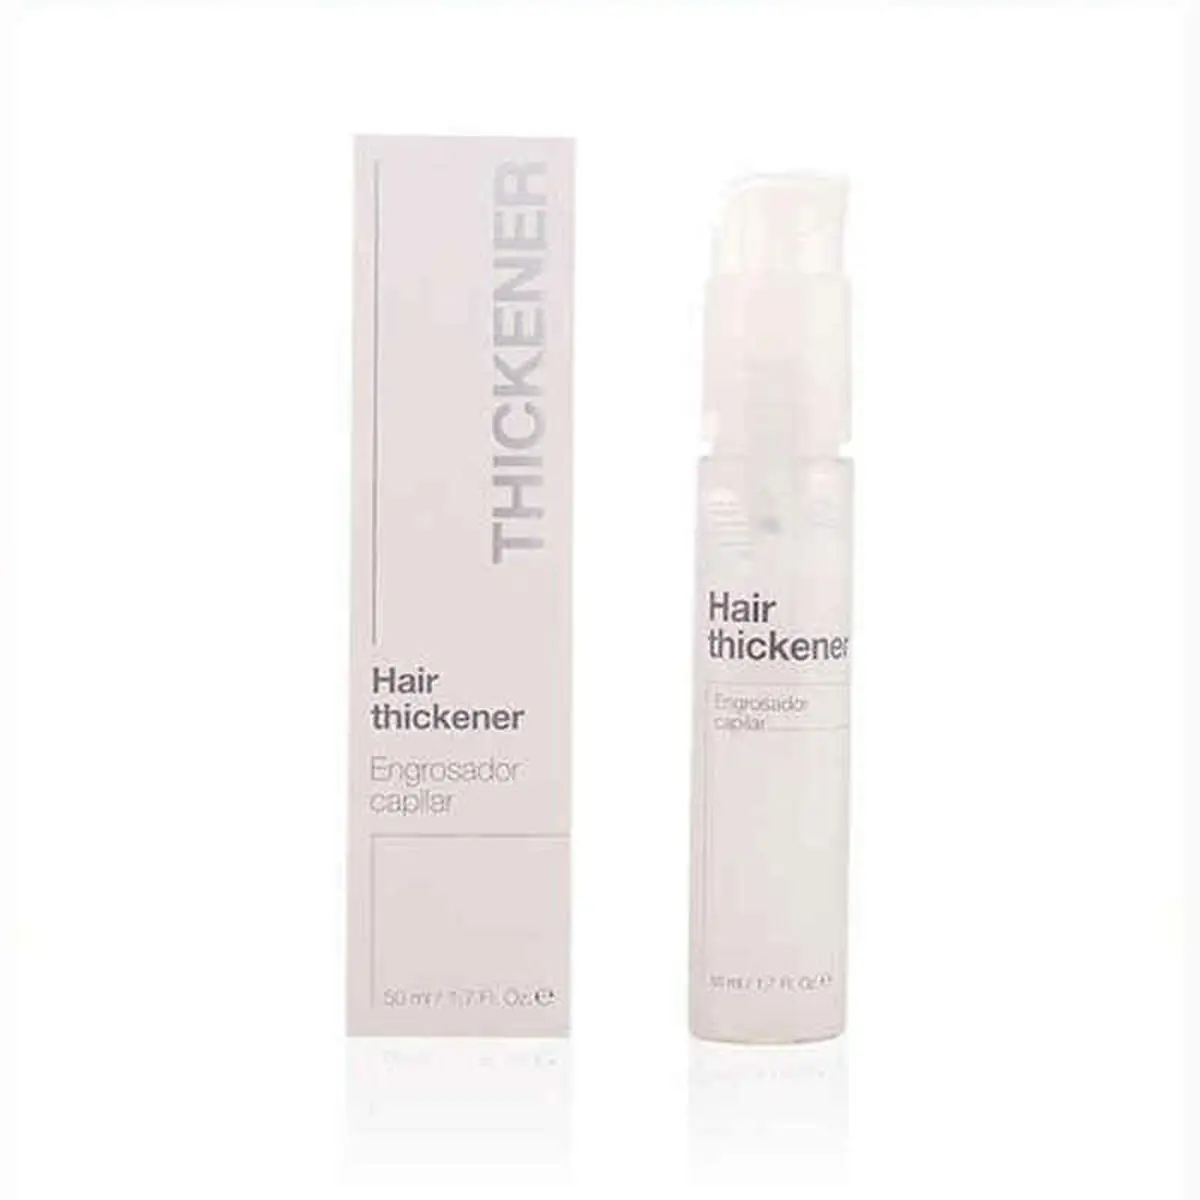 Siero Fortificante Hair Thickener The Cosmetic Republic TCR37 (50 ml)